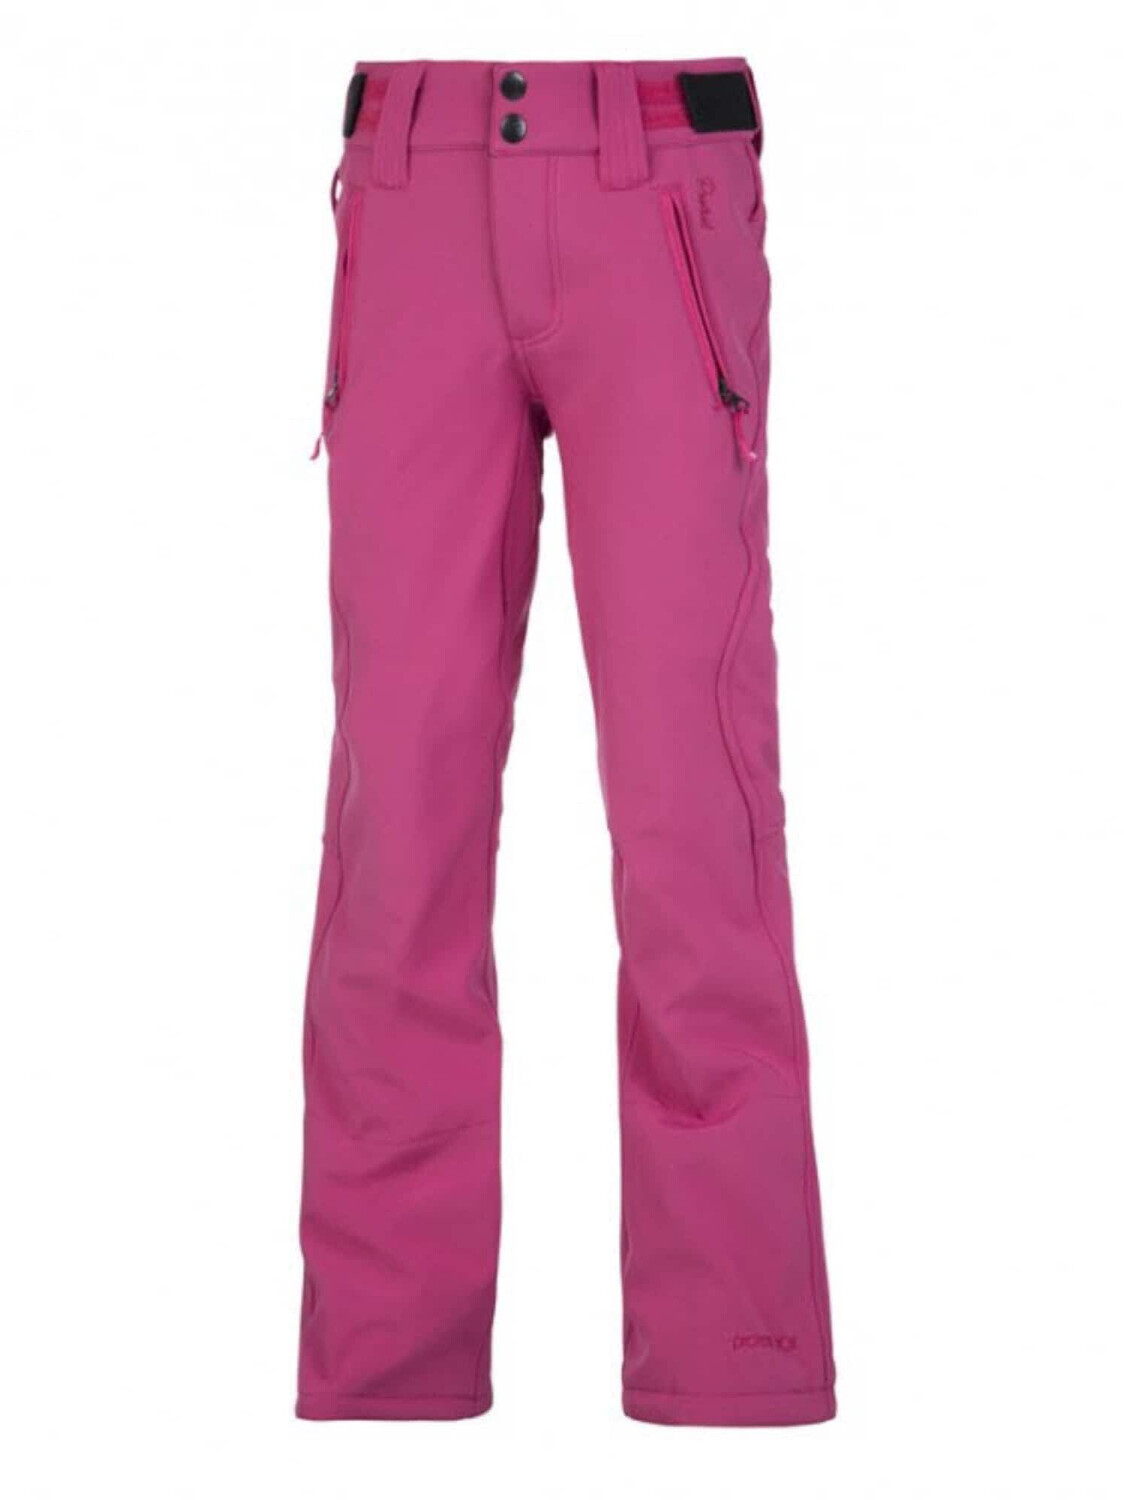 Buy Protest Lole JR Softshell Ski Trousers from £33.69 (Today) – Best Deals  on